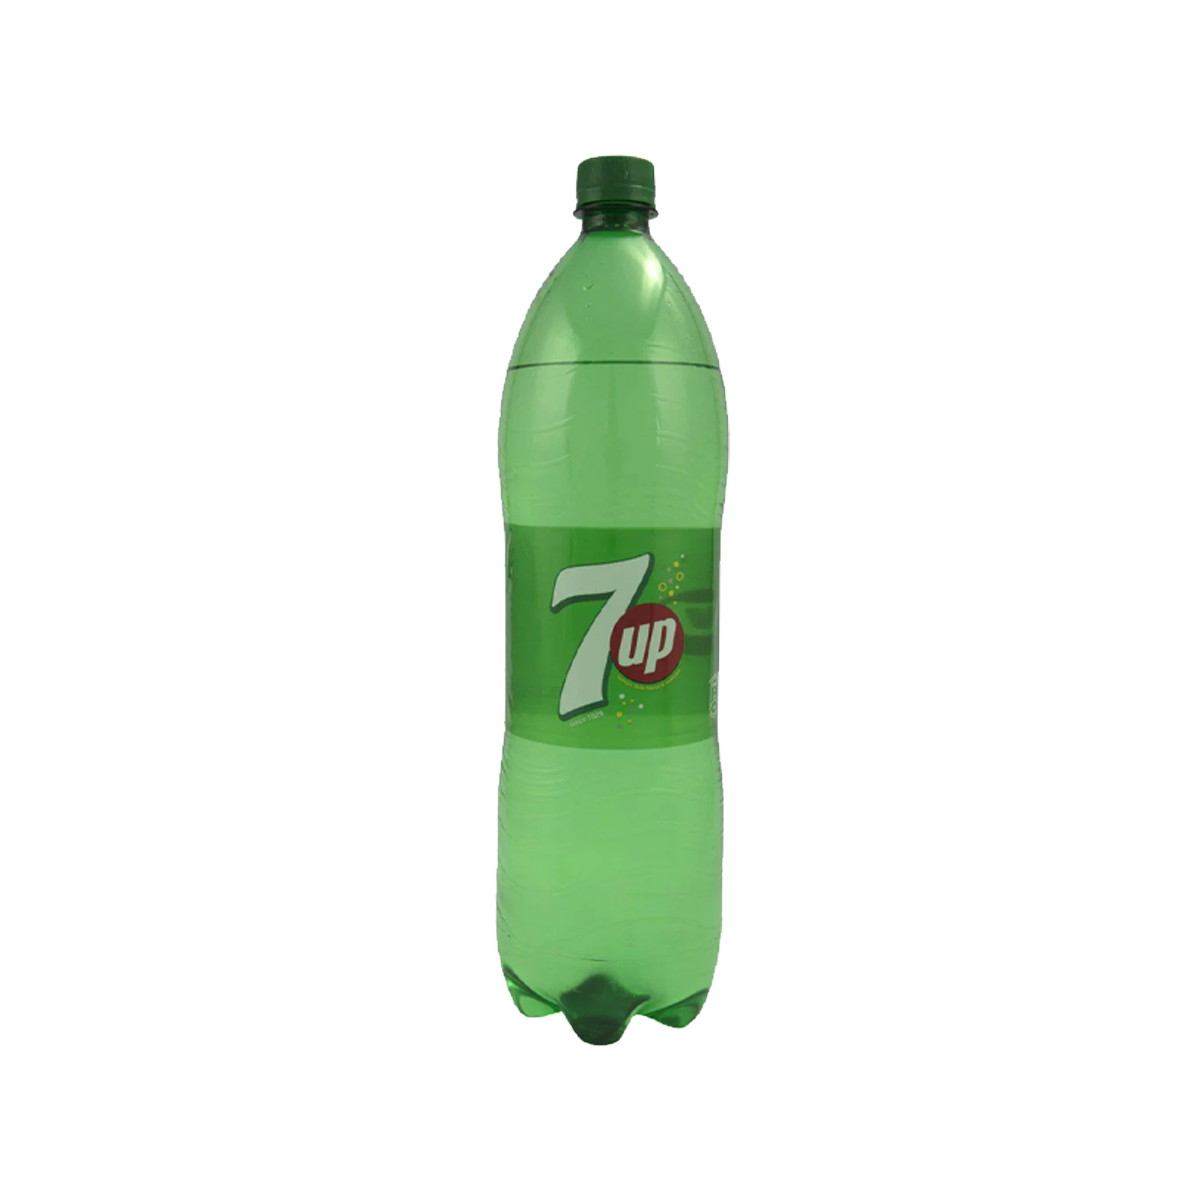 Local Cold Drink 7up Free 1.5litre